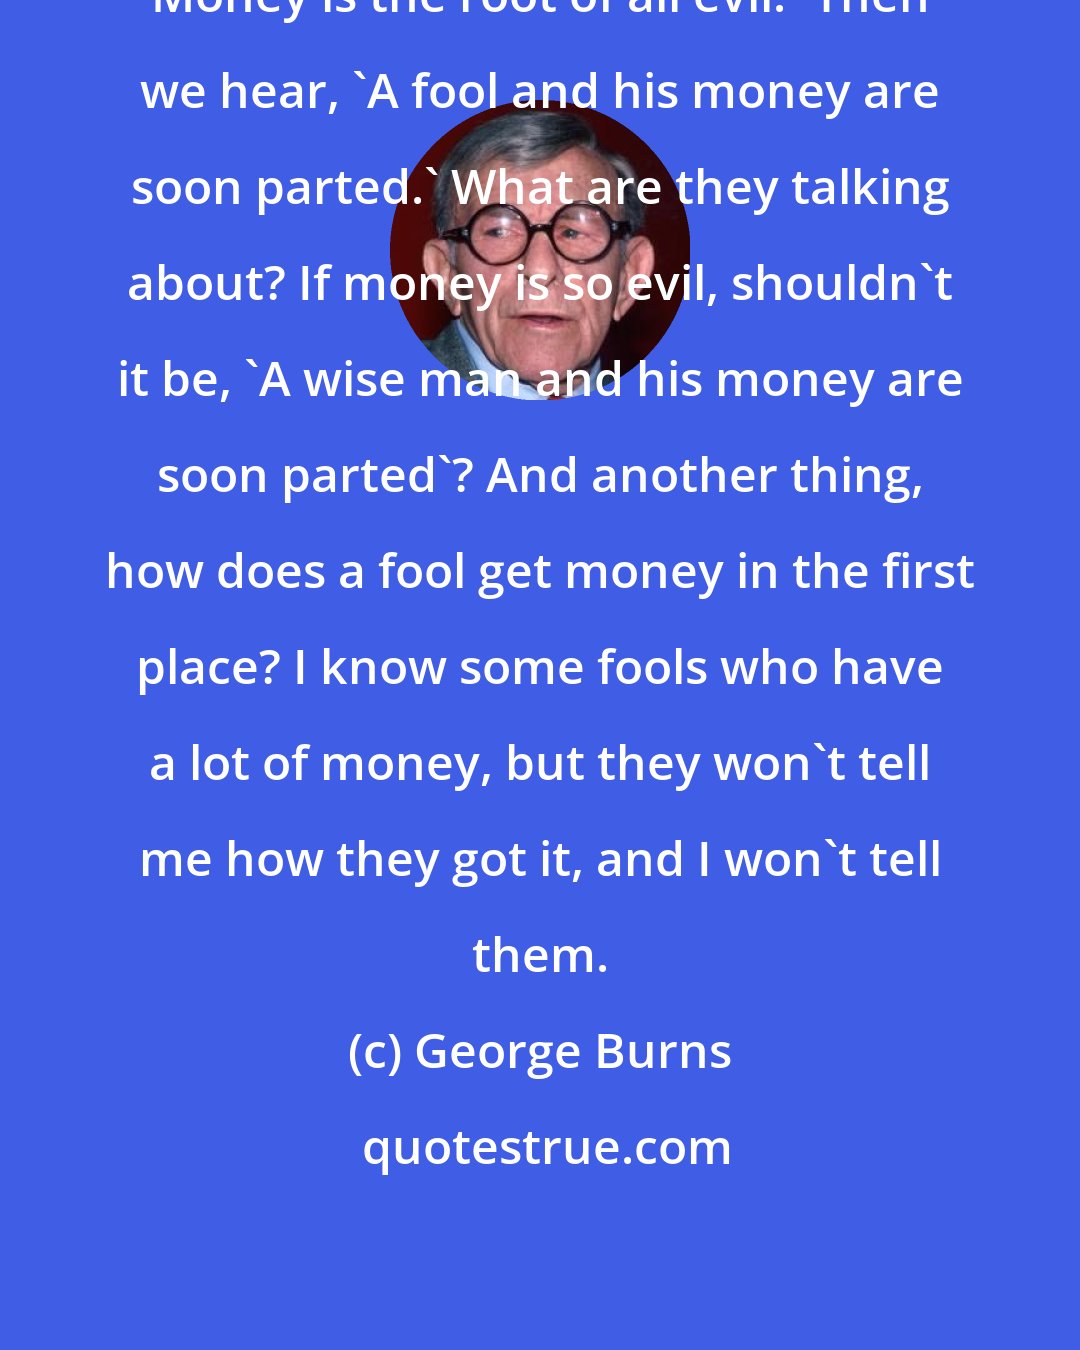 George Burns: Money is the root of all evil.' Then we hear, 'A fool and his money are soon parted.' What are they talking about? If money is so evil, shouldn't it be, 'A wise man and his money are soon parted'? And another thing, how does a fool get money in the first place? I know some fools who have a lot of money, but they won't tell me how they got it, and I won't tell them.